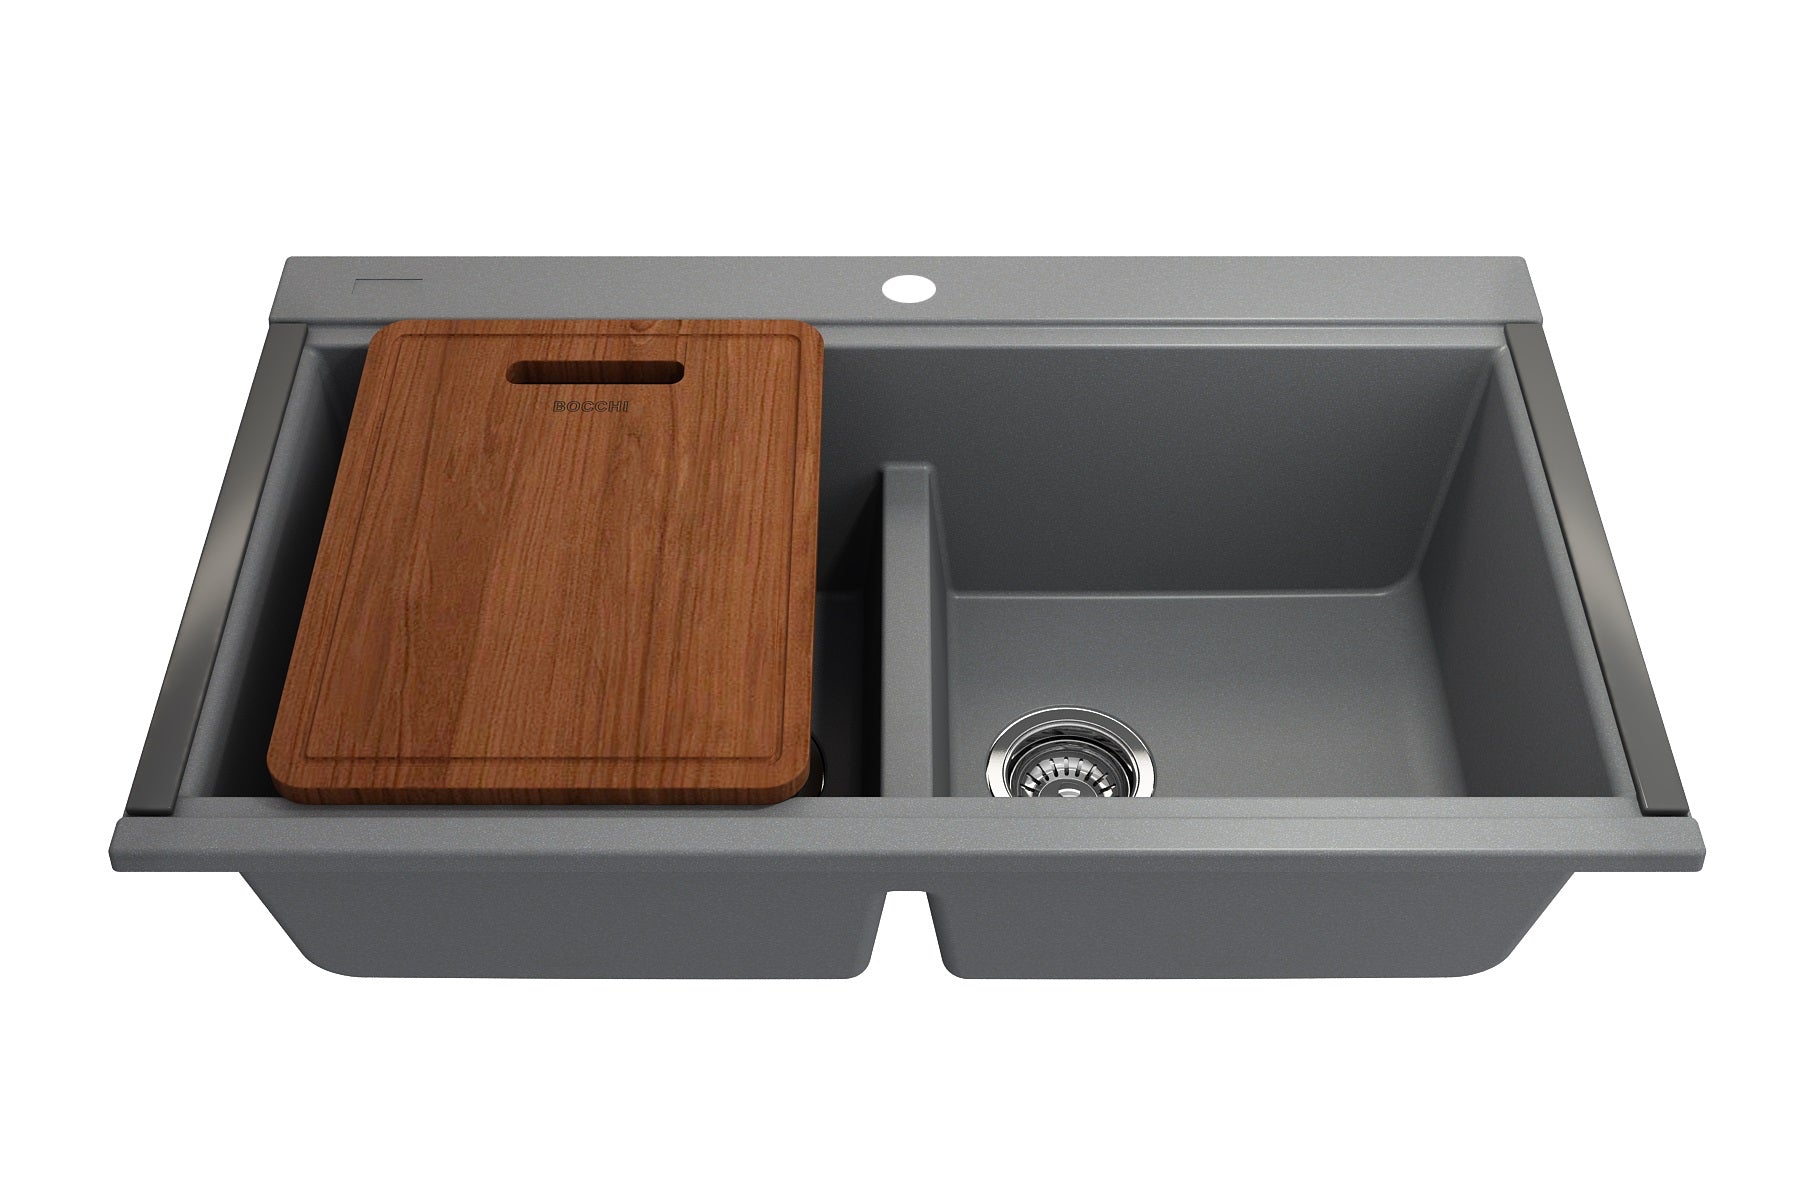 Bocchi 34" Undermount Double Bowl Composite Workstation Kitchen Sink with Covers in Concrete Gray